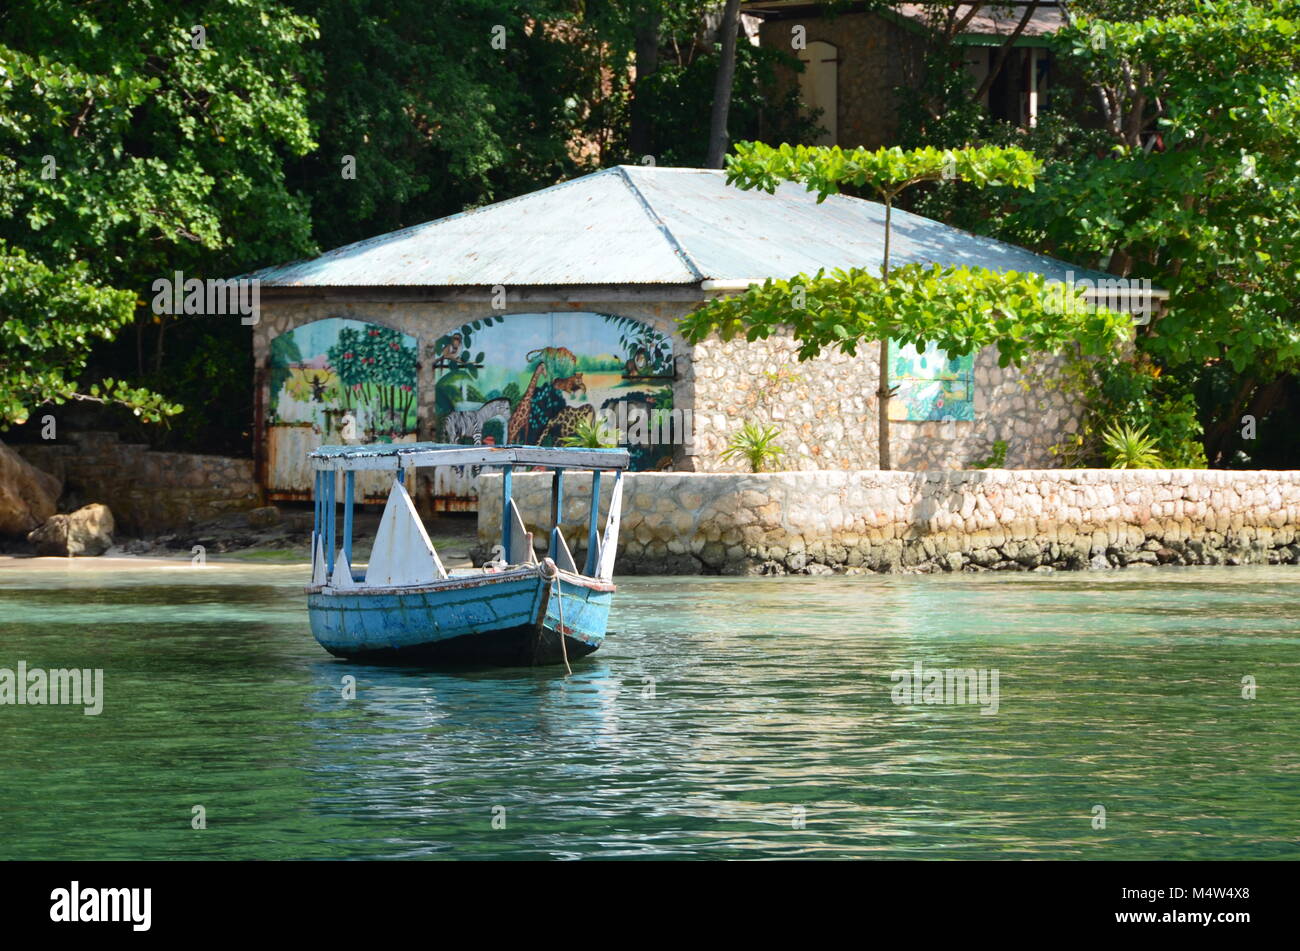 Labadee, Haiti. Haitian Village Experience shore excursion passes traditional wooden row boat and stone building with painted mural. Stock Photo